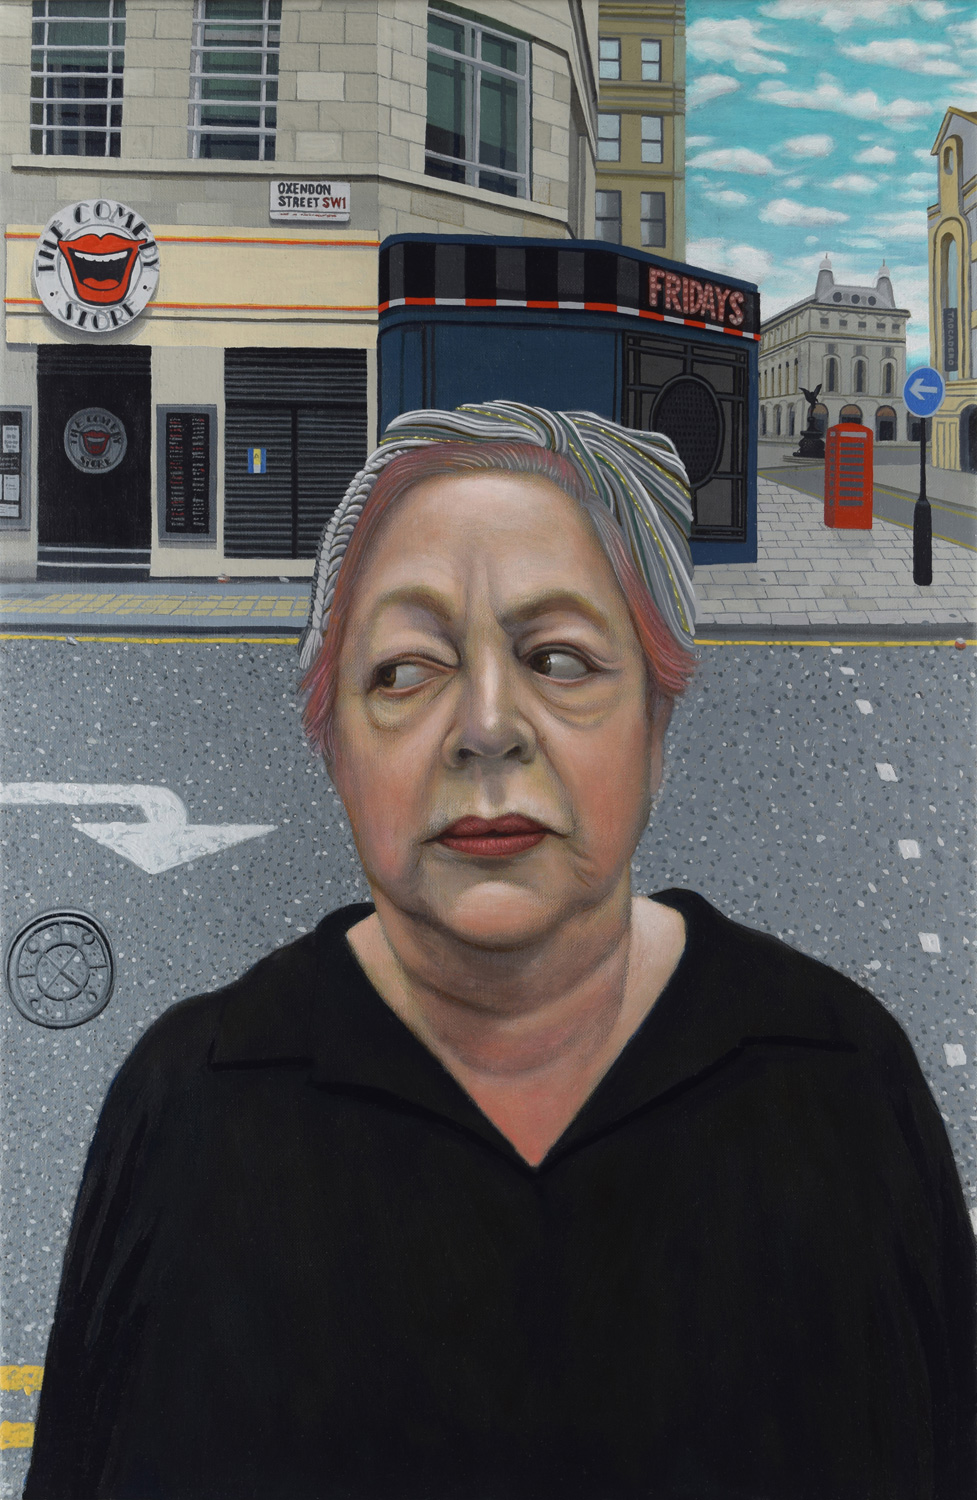 Comedian Jo Brand and The Comedy Store